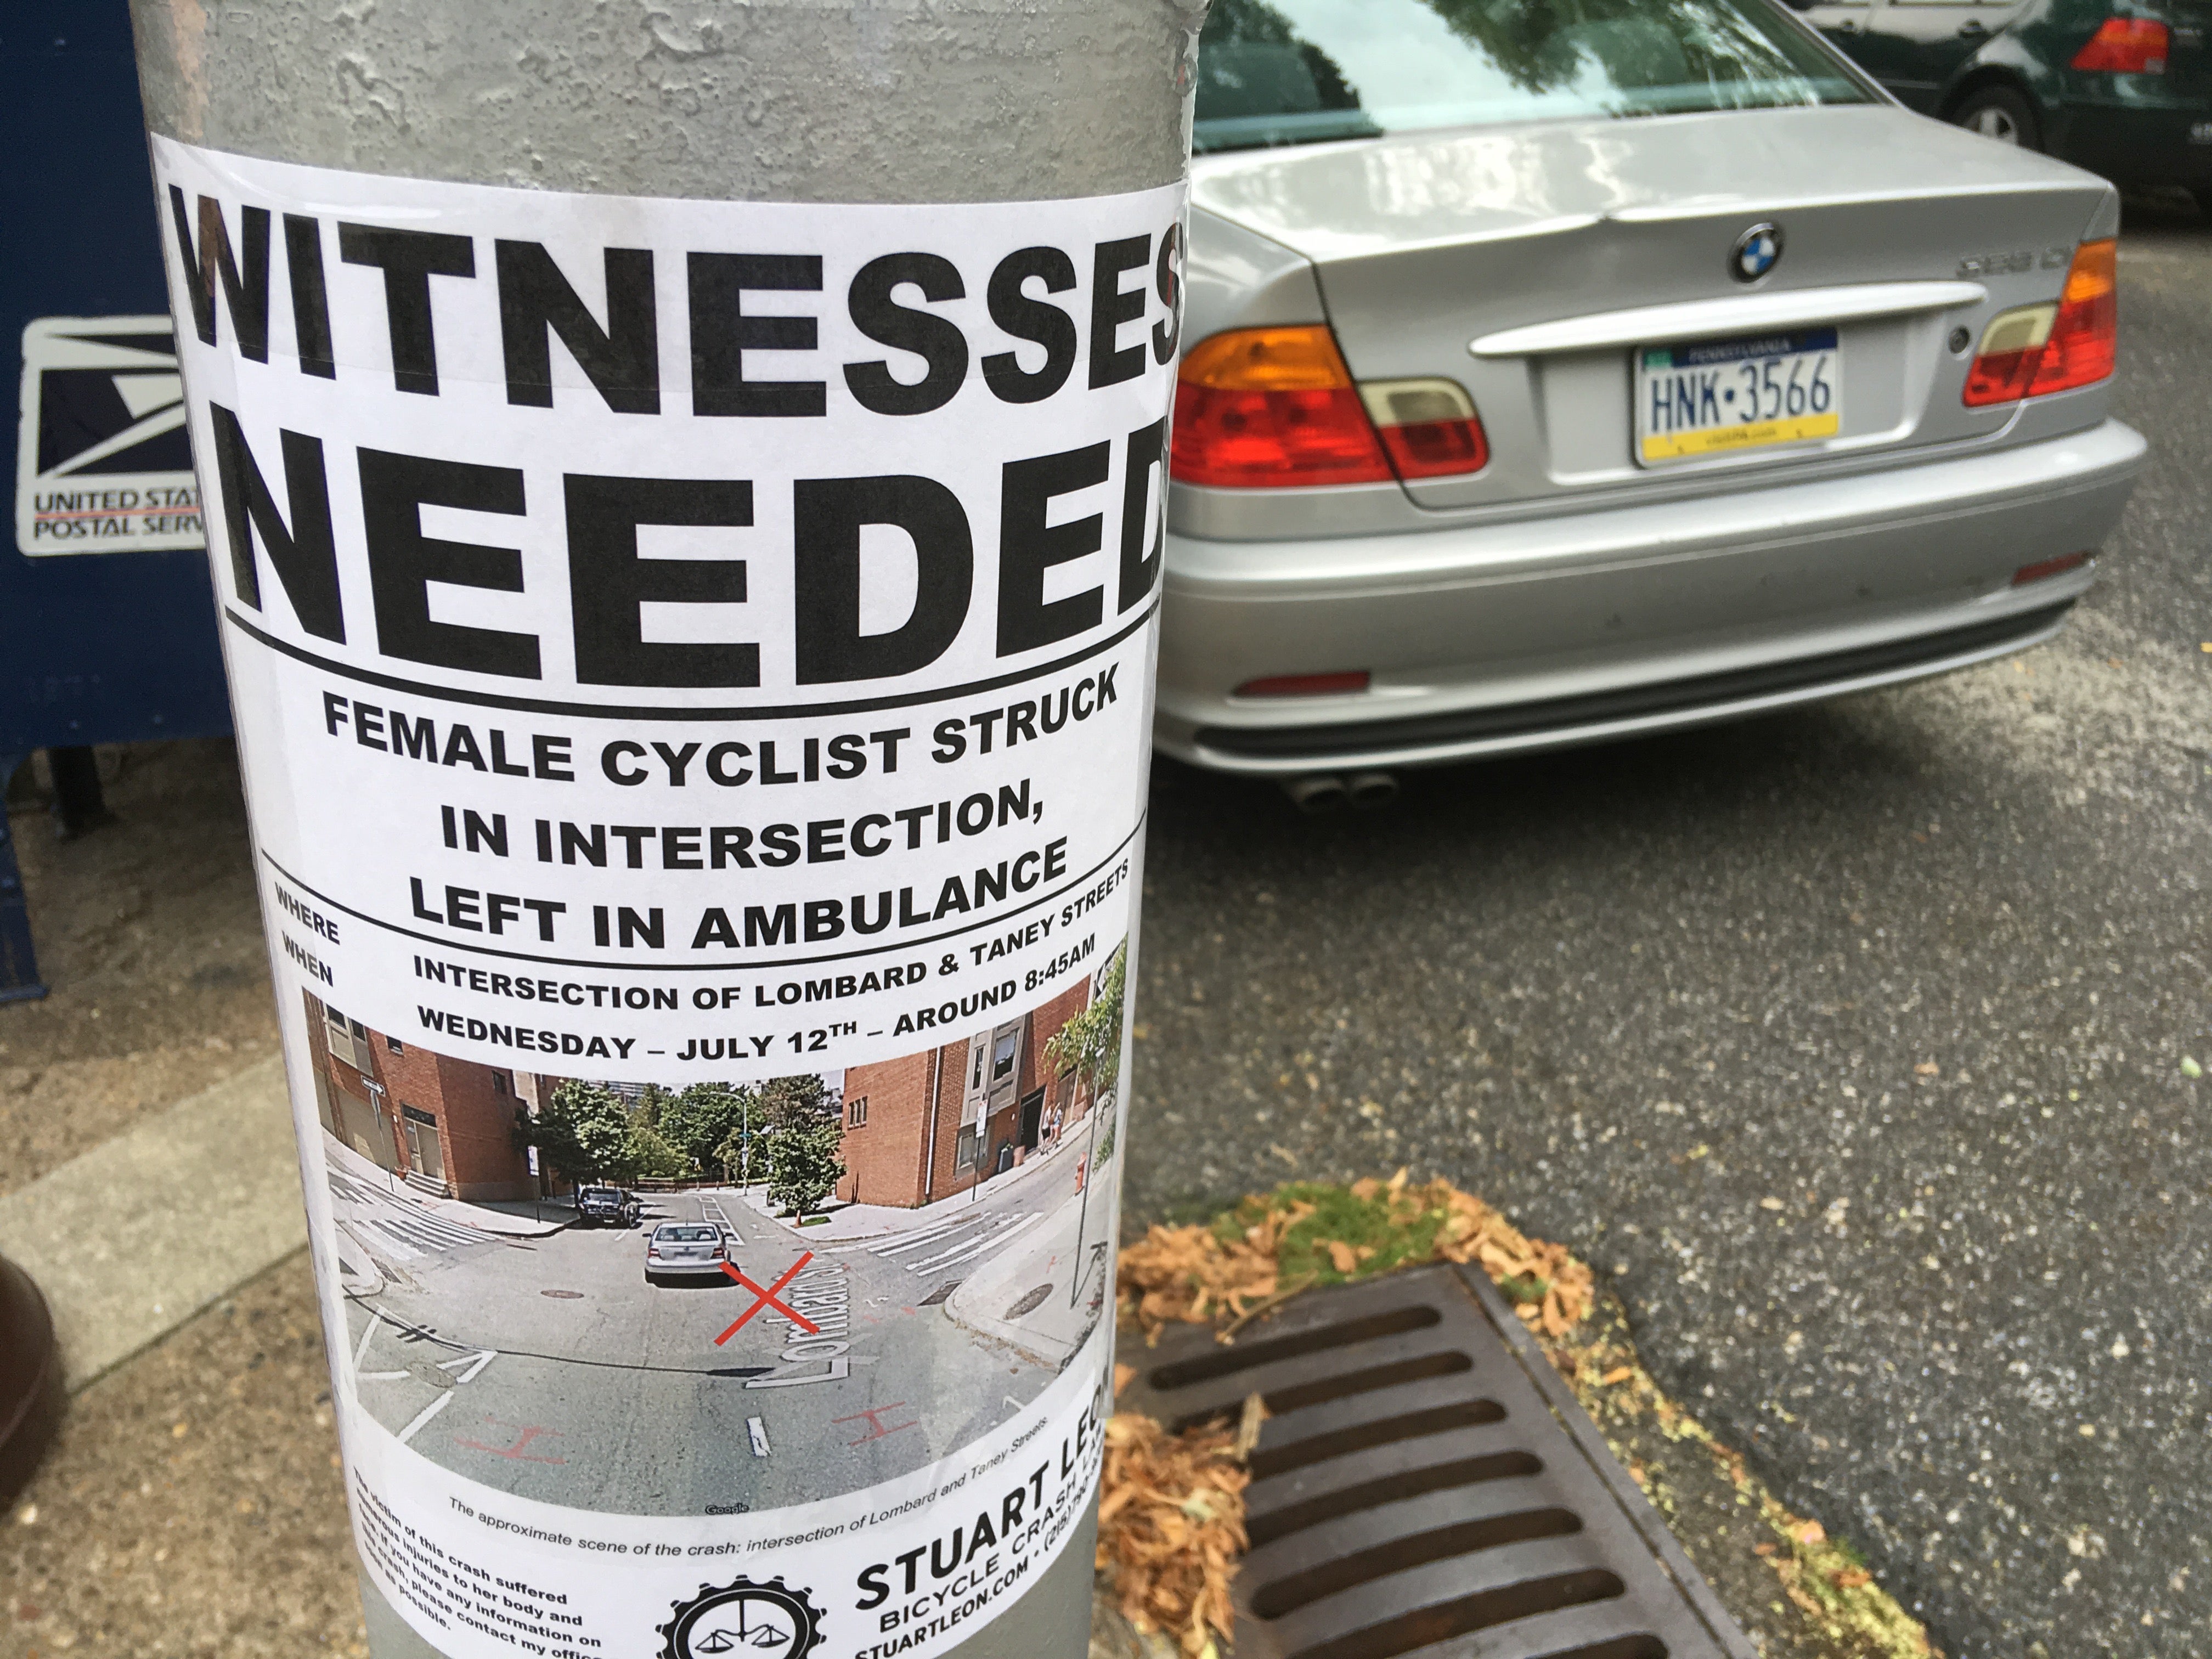 Fliers along Lombard Street in Fitler Square looking for witnesses of a recent car crash that injured a cyclist